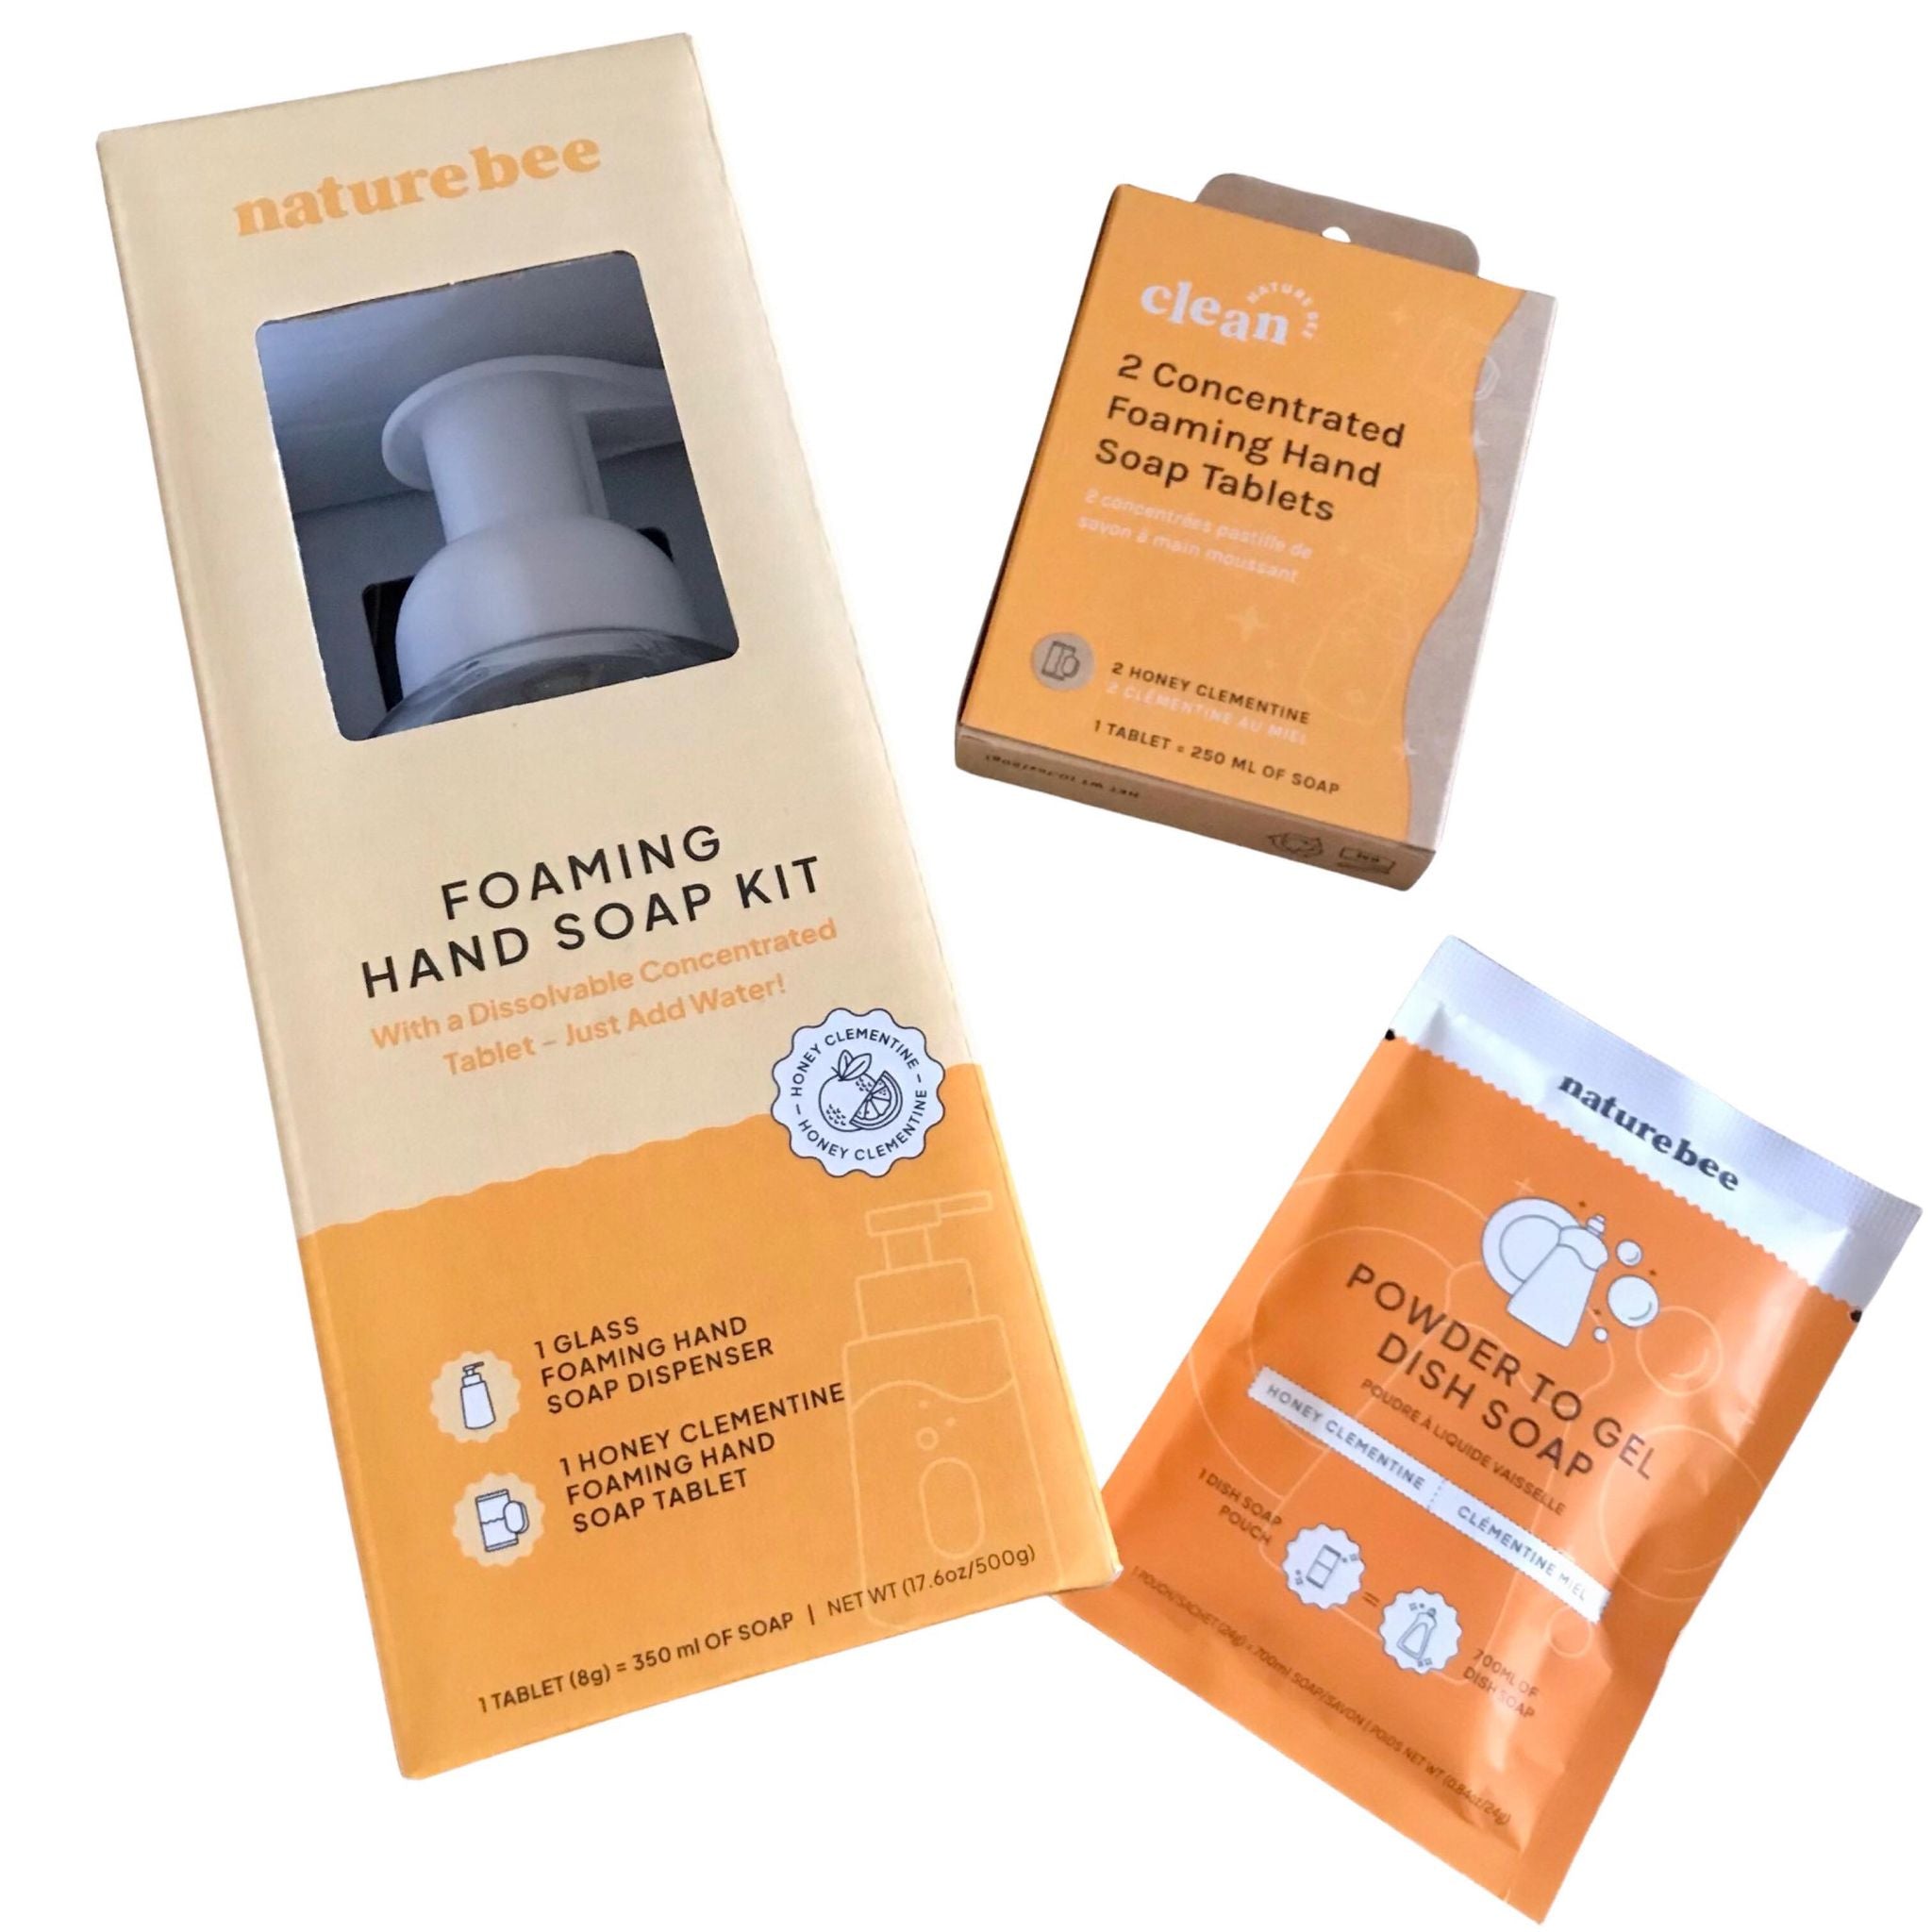 Included in this honey clementine hand and dish soap set is a foaming hand soap kit (with 1 tablet) as well as a 2 pack of tablets, and a powder to gel dish soap, all in the same sweet honey clementine scent.